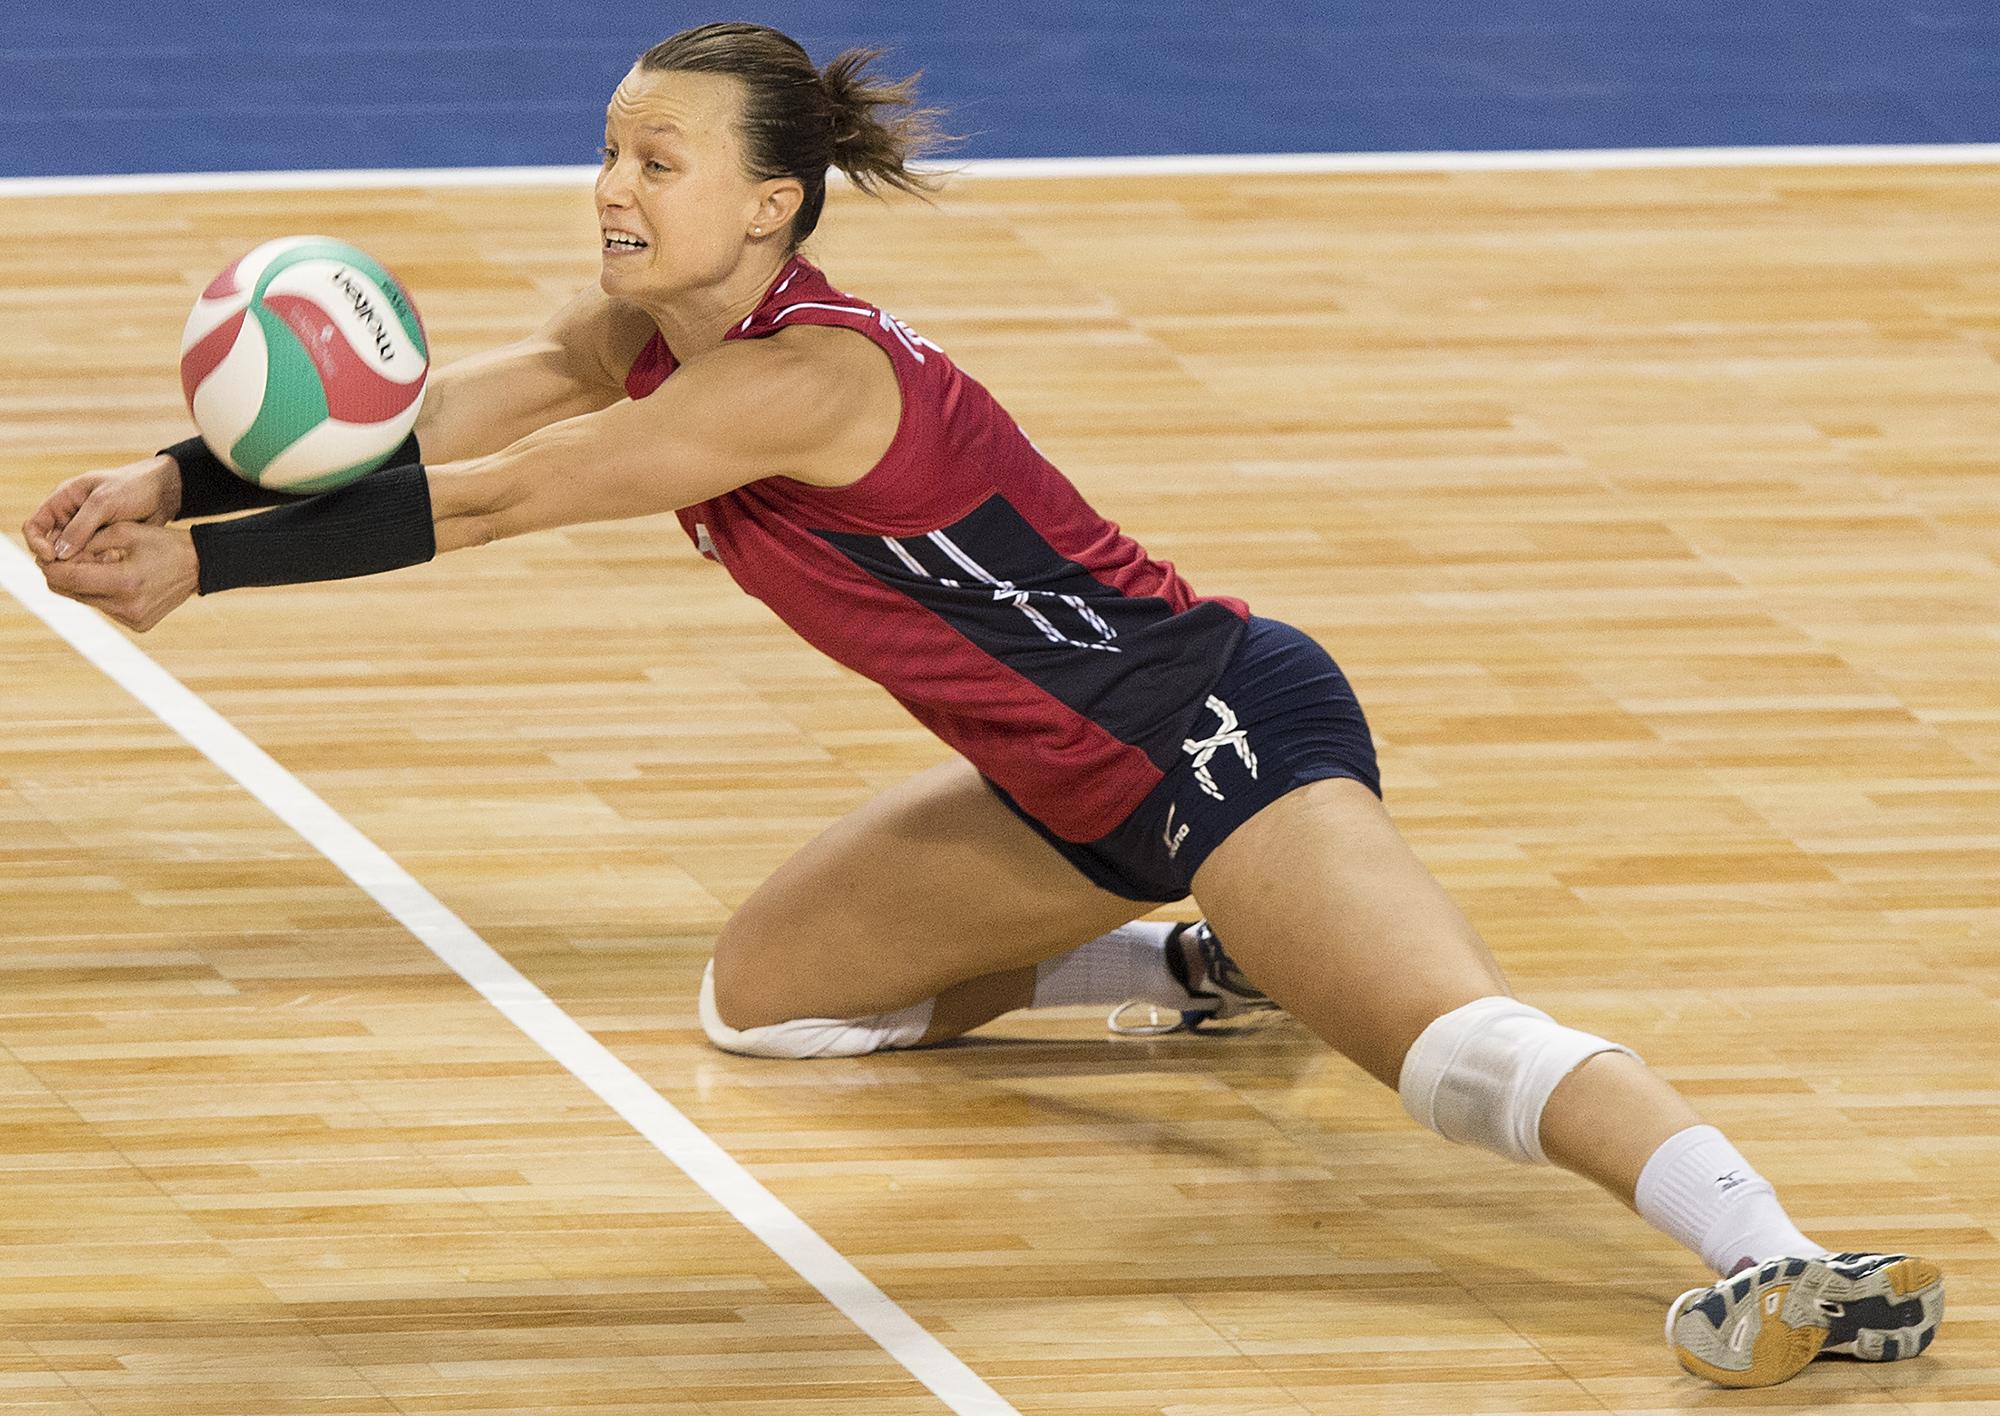 U S Women S Volleyball Roster For Rio Games Includes Former Husky.